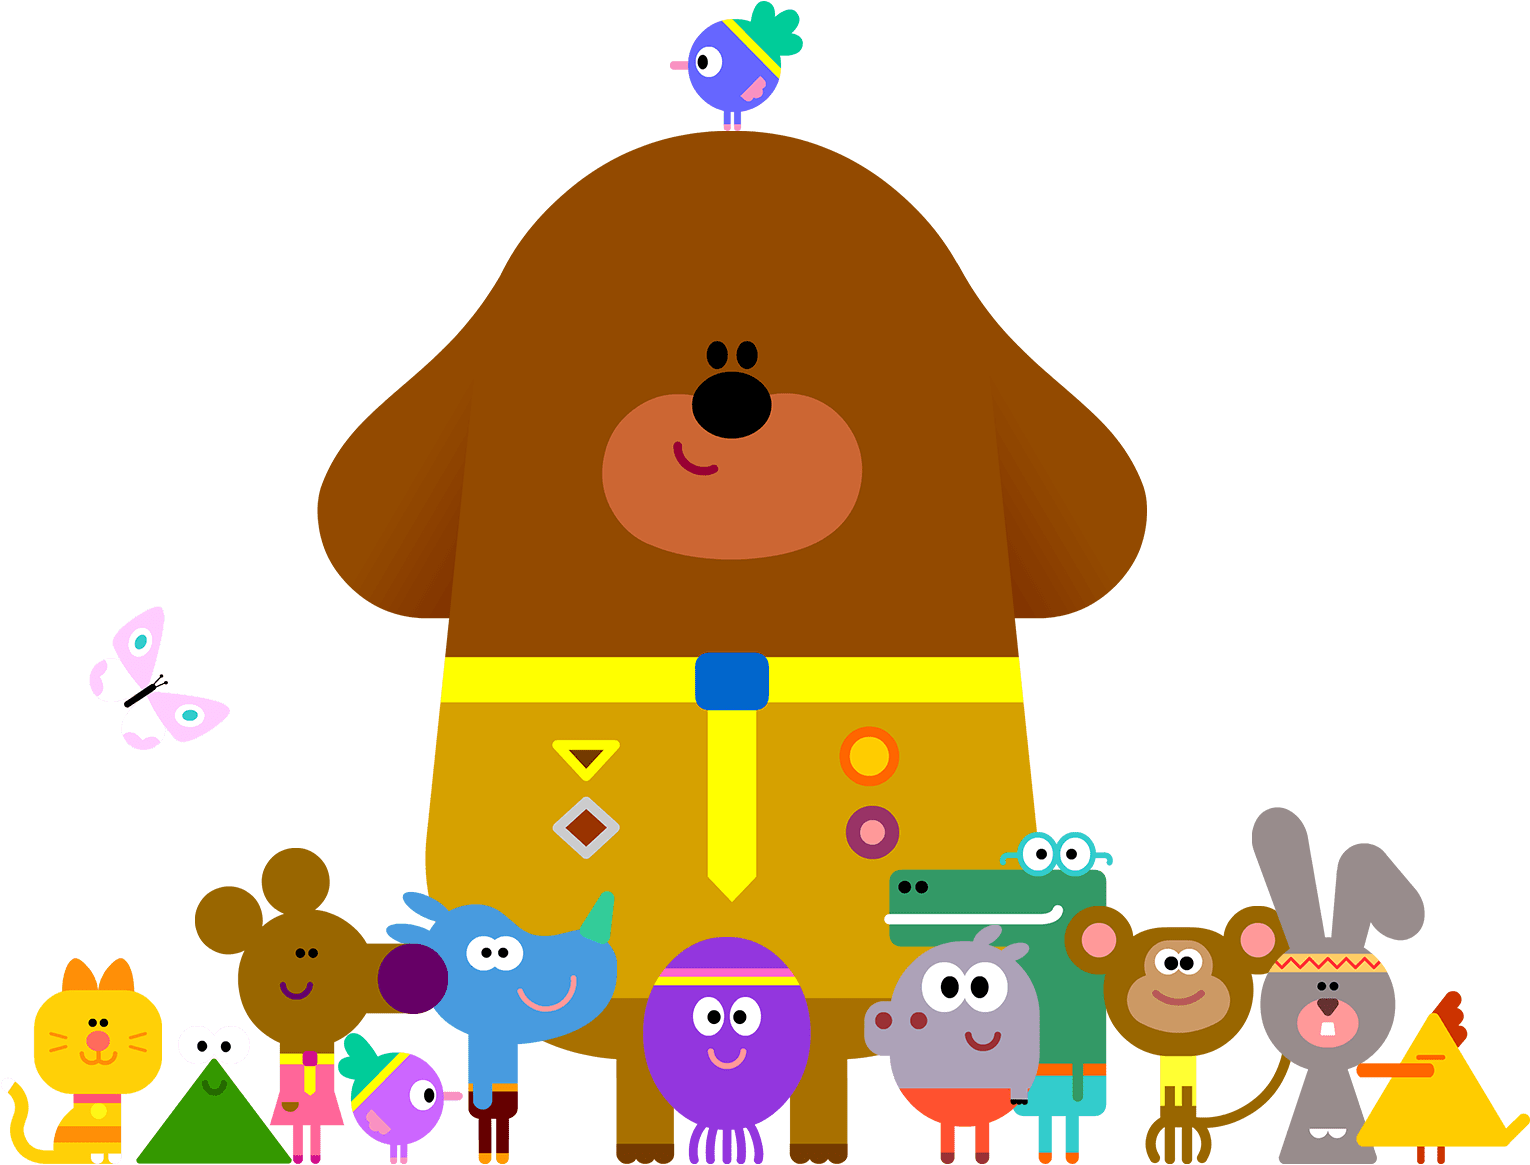 Cbeebies Will Be Available Across 15 Cable Operators - Cbeebies Hey Duggee Badges (1636x1274)